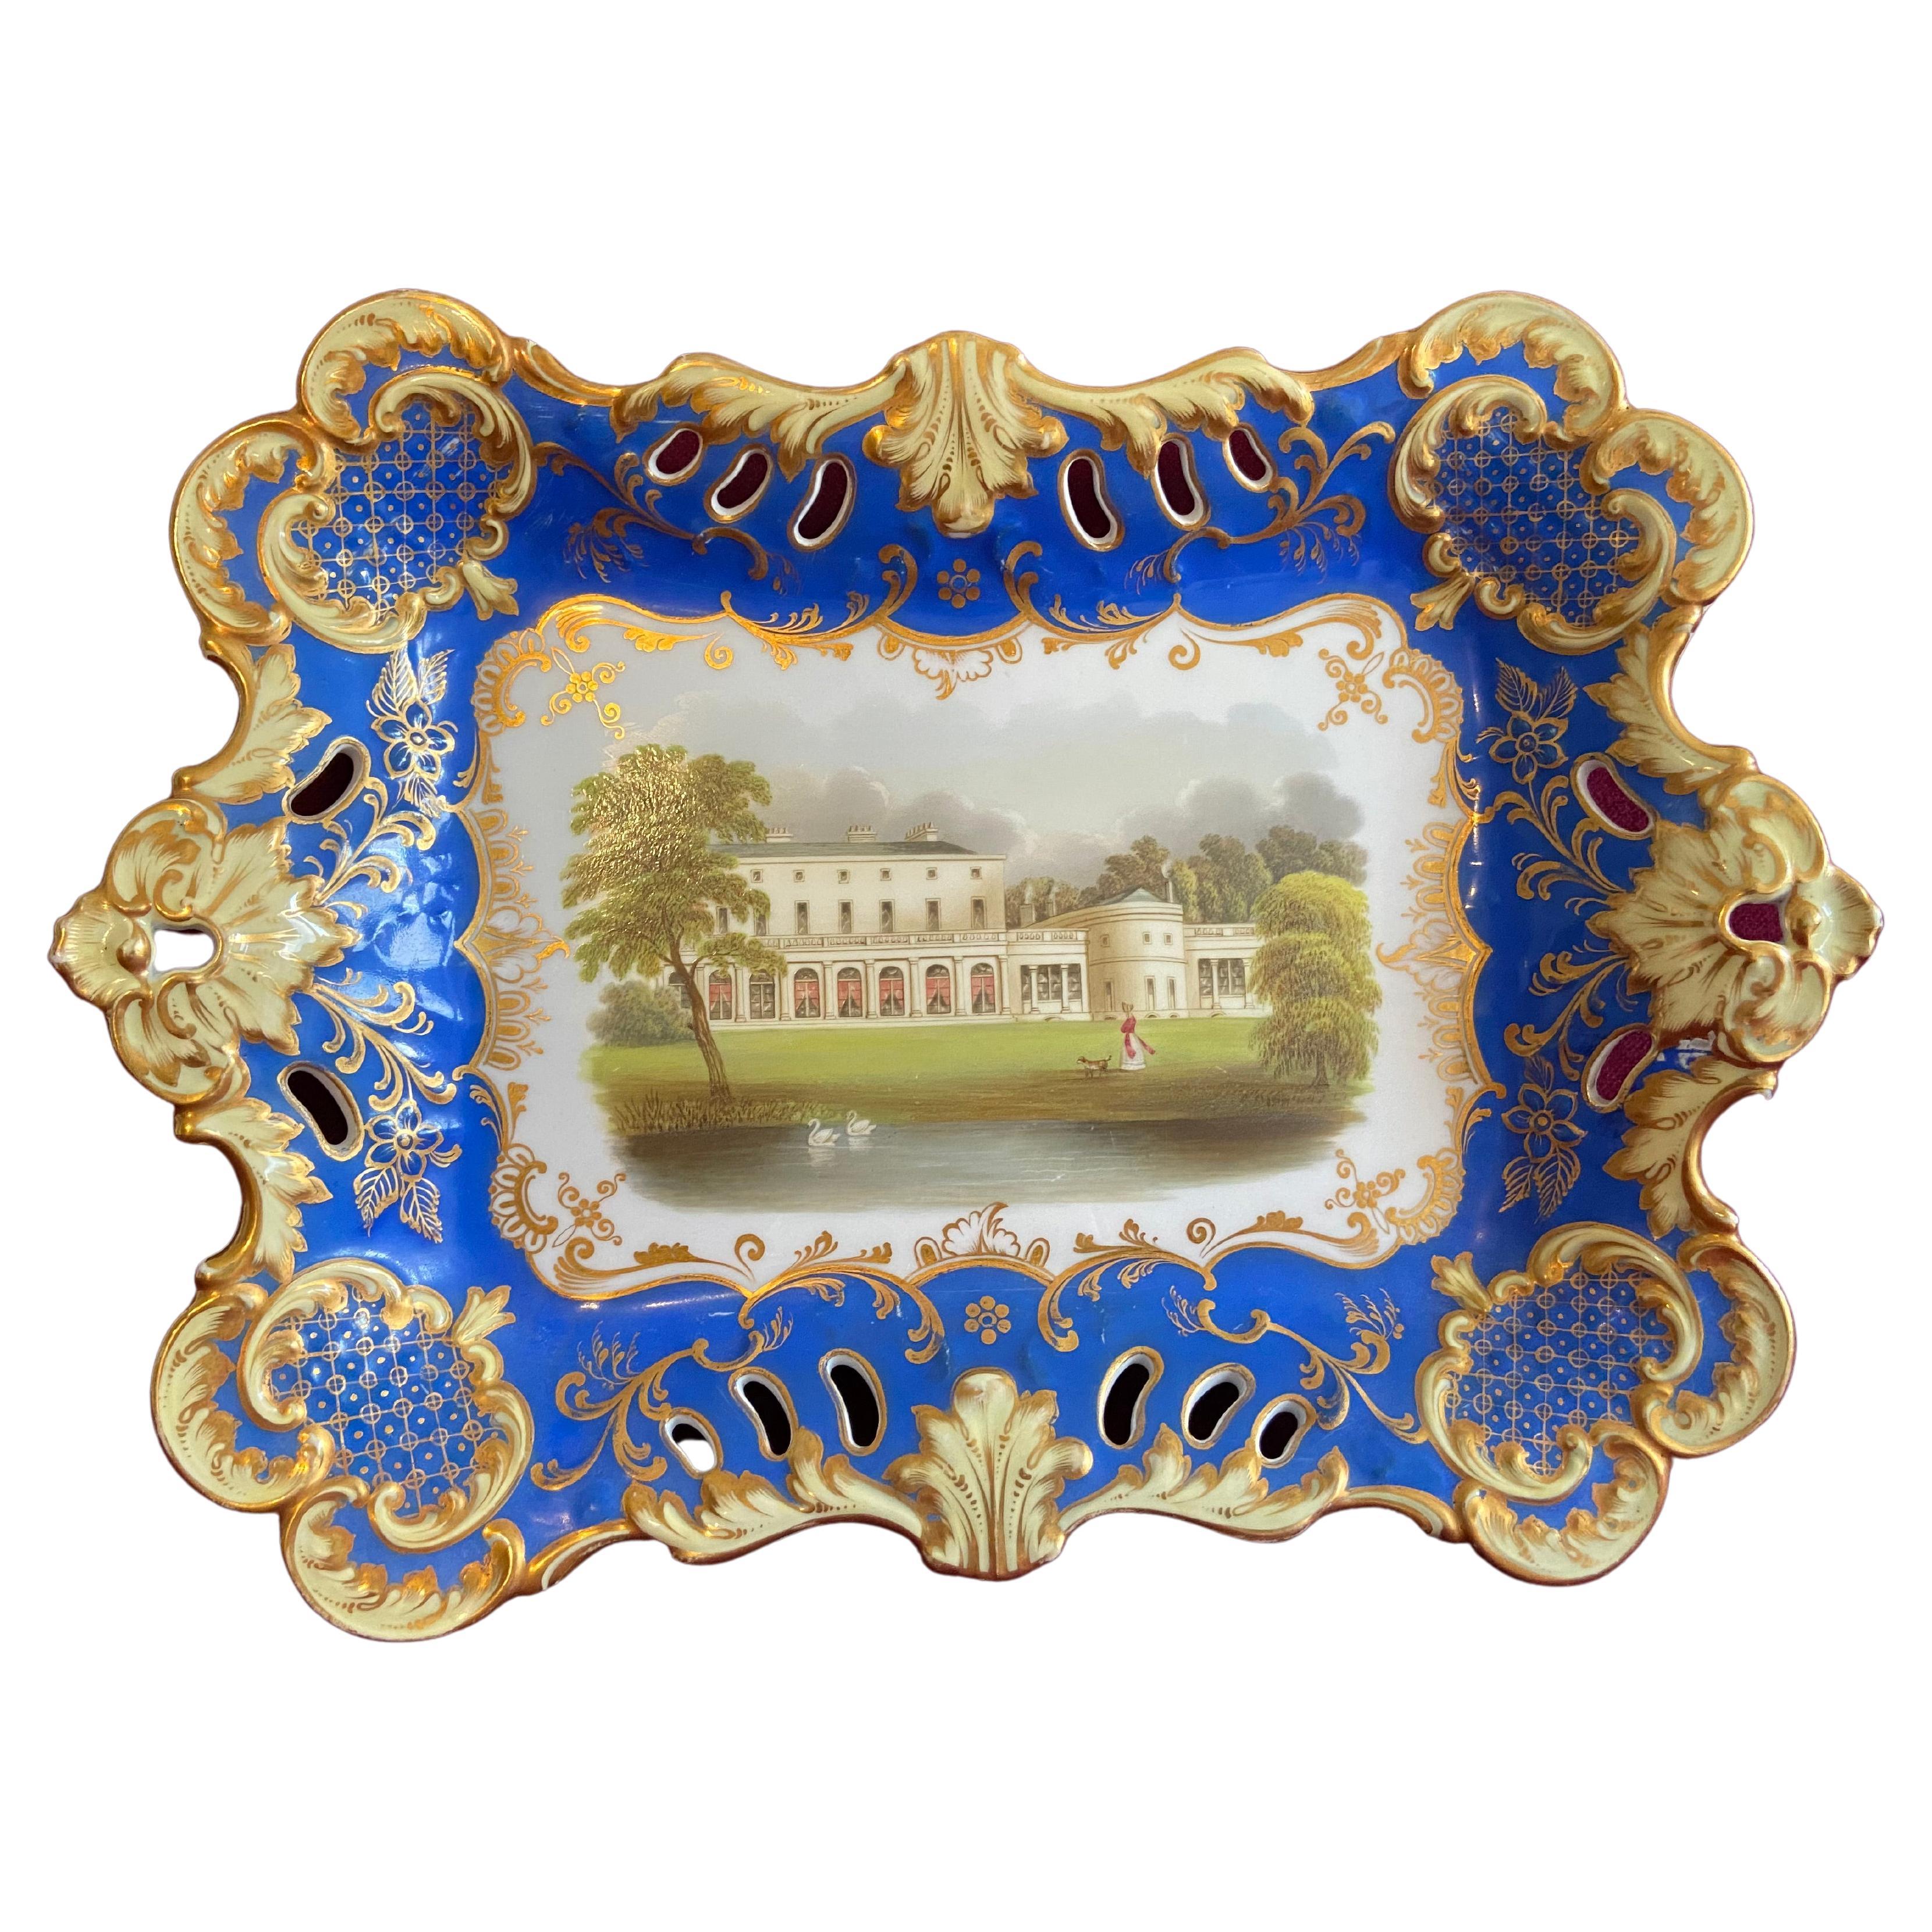 An English Porcelain Tray c.1830 with a view of Frogmore House For Sale